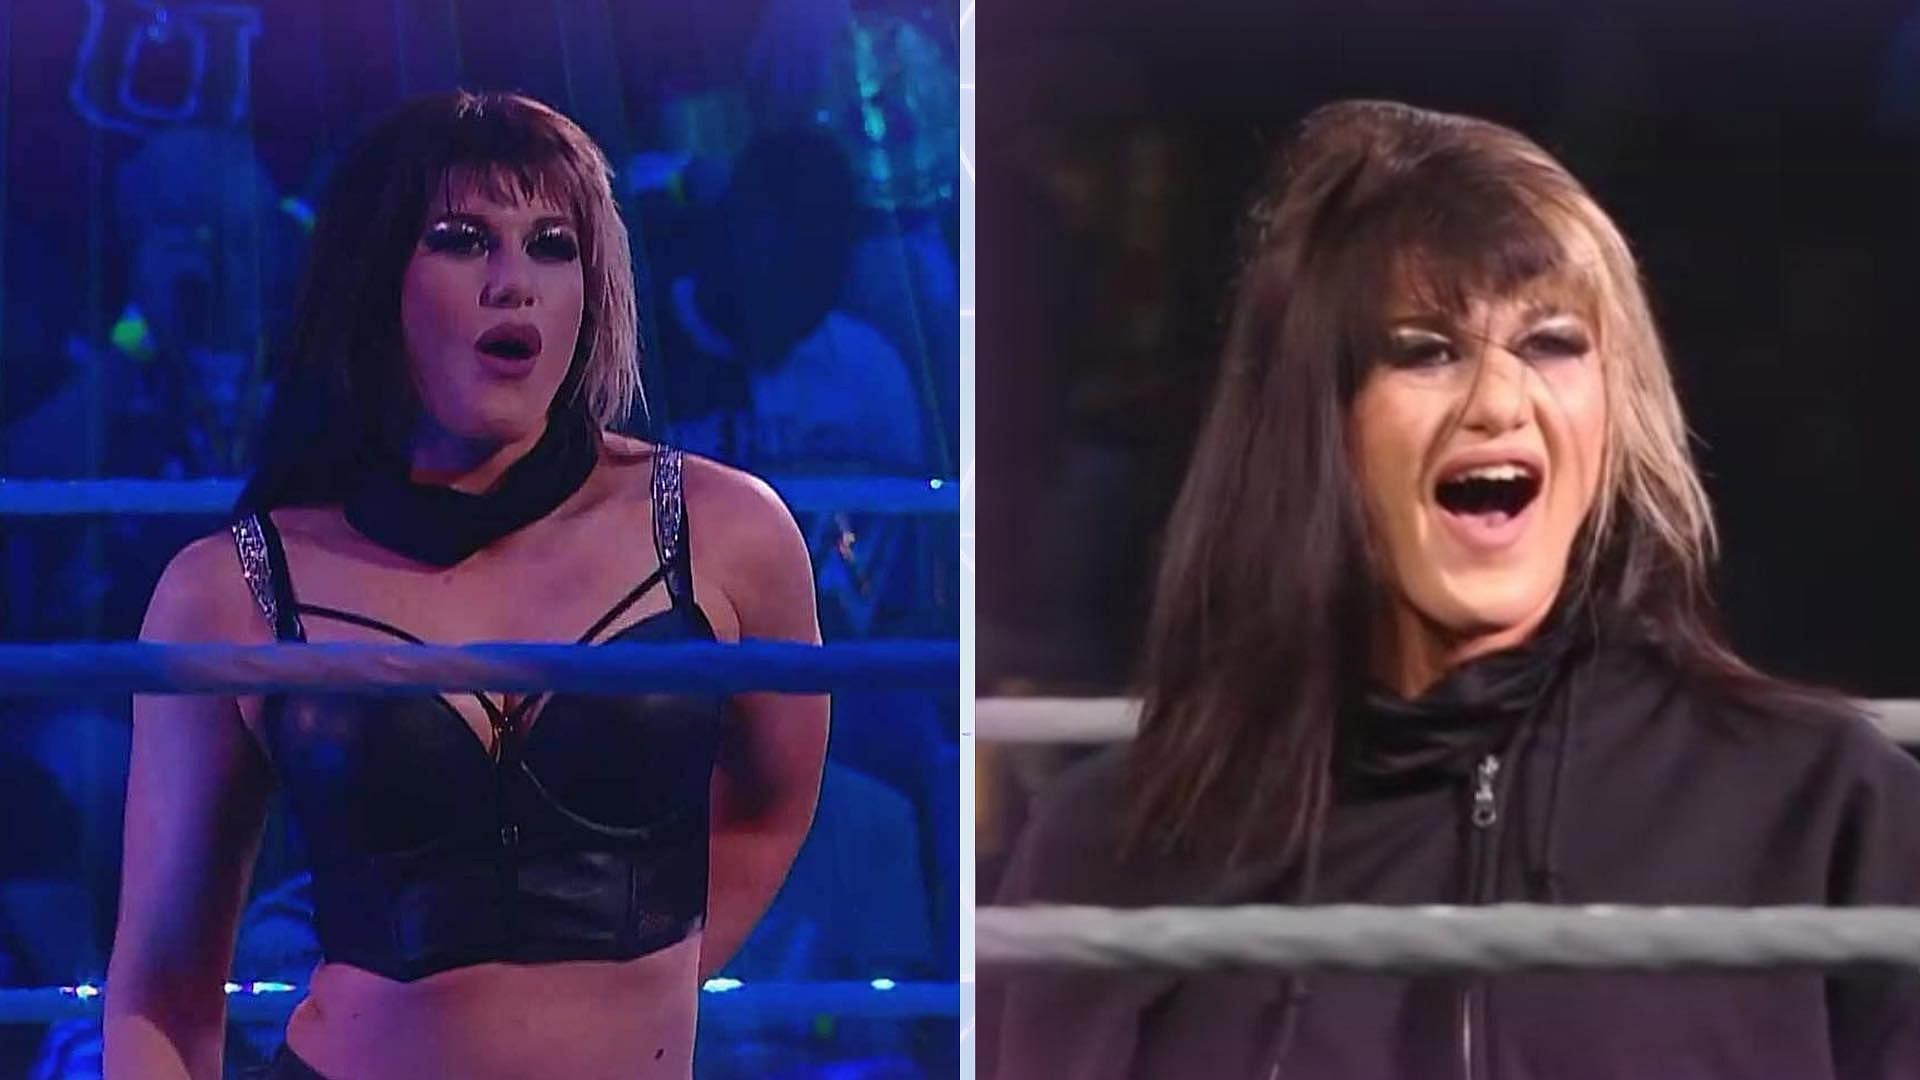 Blair Davenport was shockingly revealed to be WWE NXT